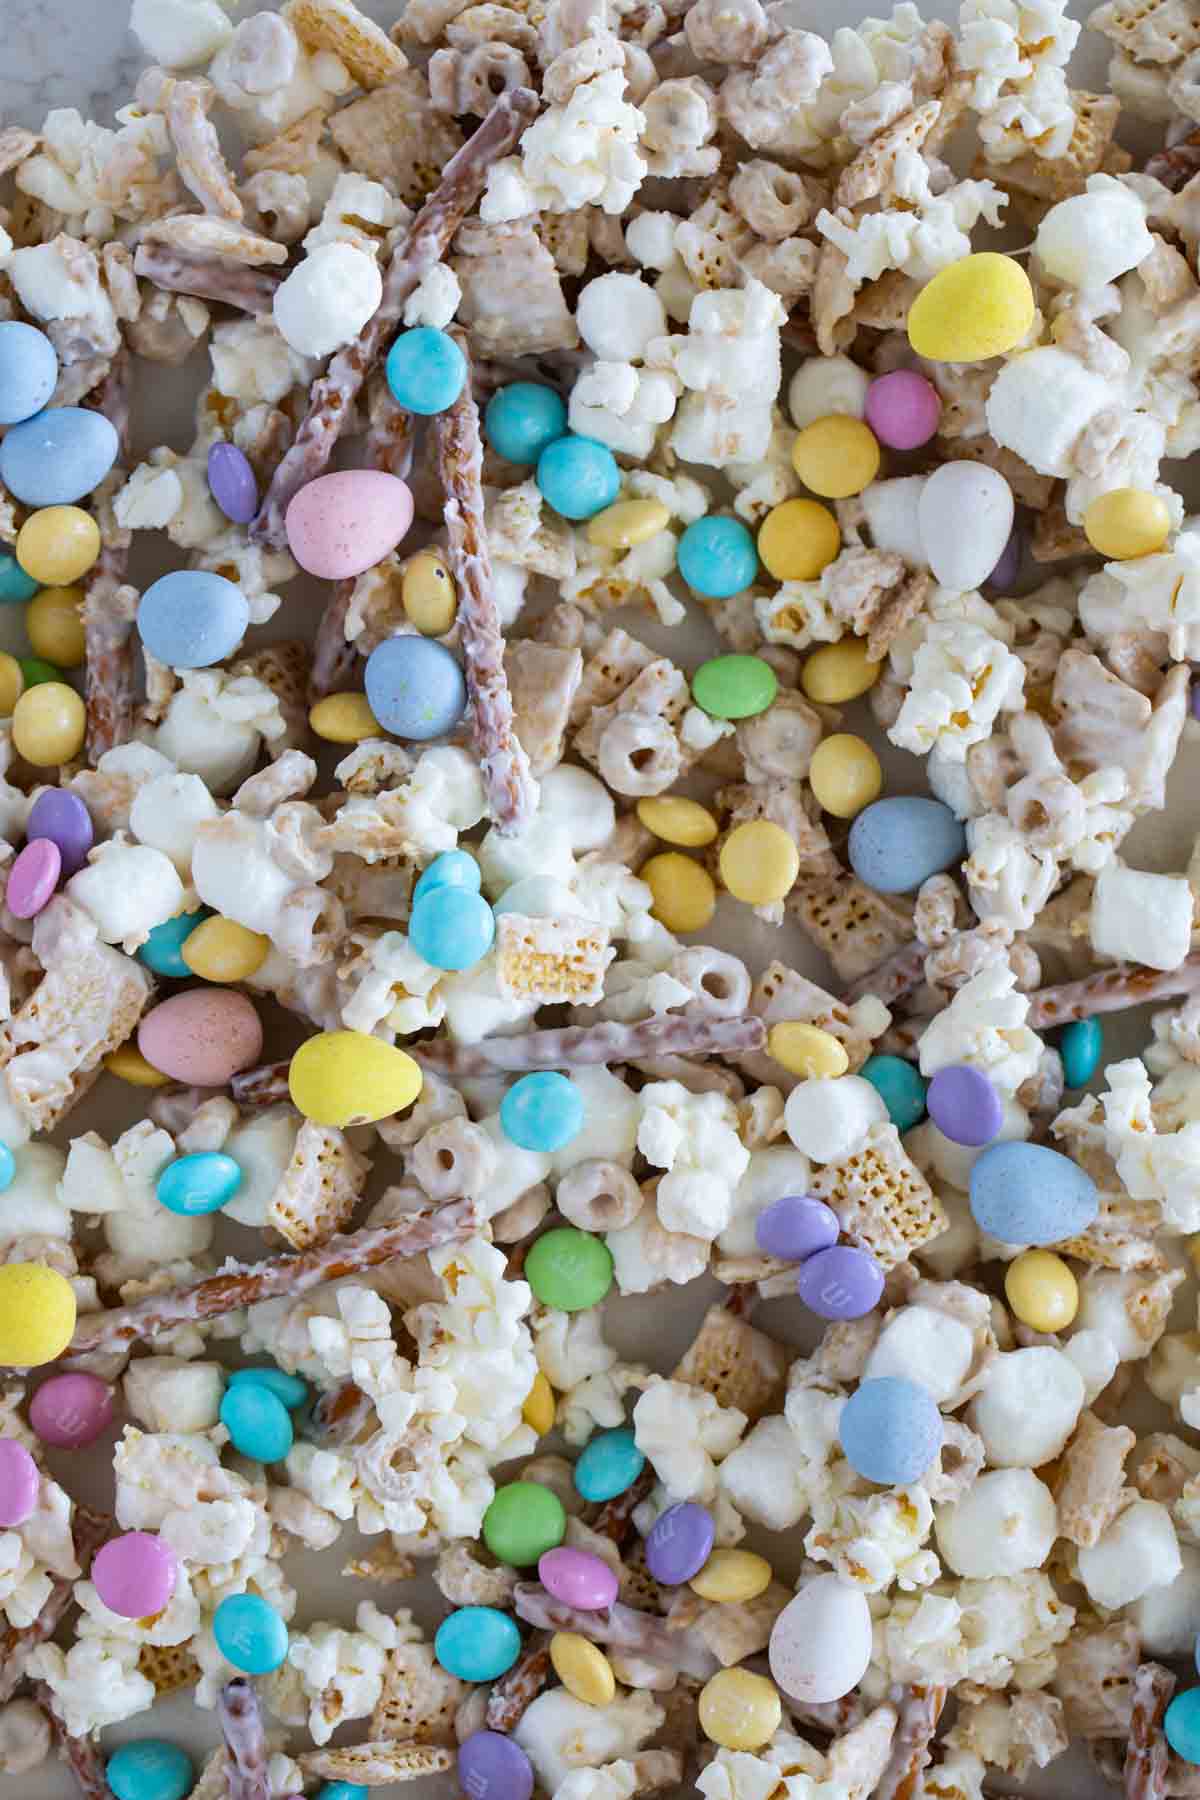 Bunny bait made with popcorn, cereal, pretzels, marshmallows, and candy.